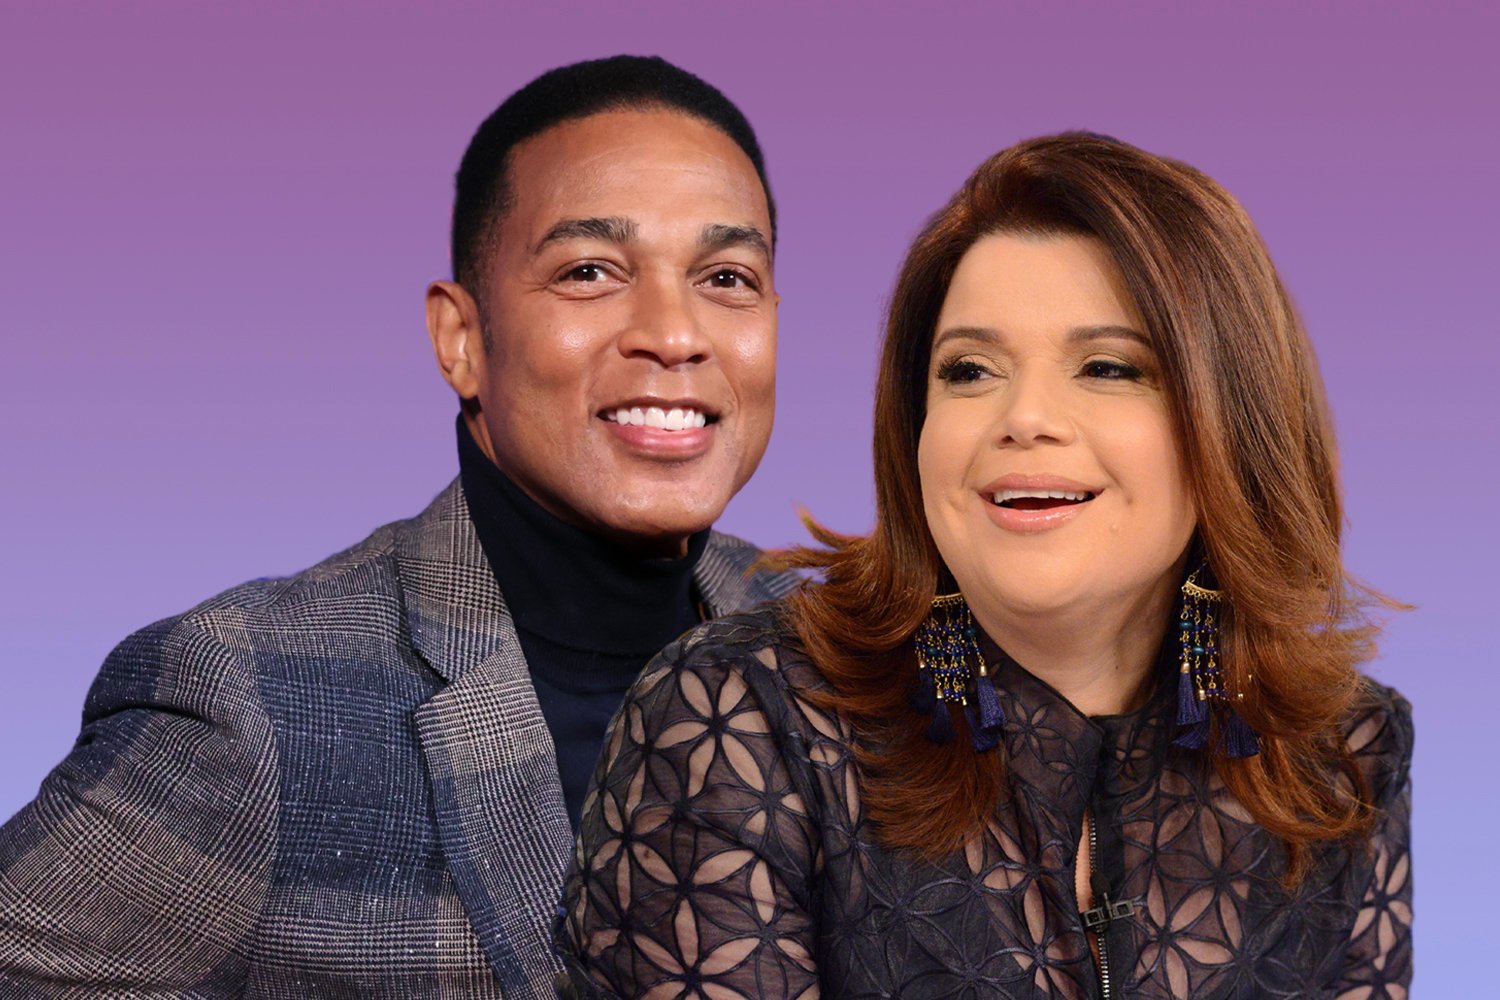 Don Lemon wearing a blazer with alternating blue and gray squares and a black turtle neck while Ana Navarro is smiling and wearing a blue top with flower cutouts